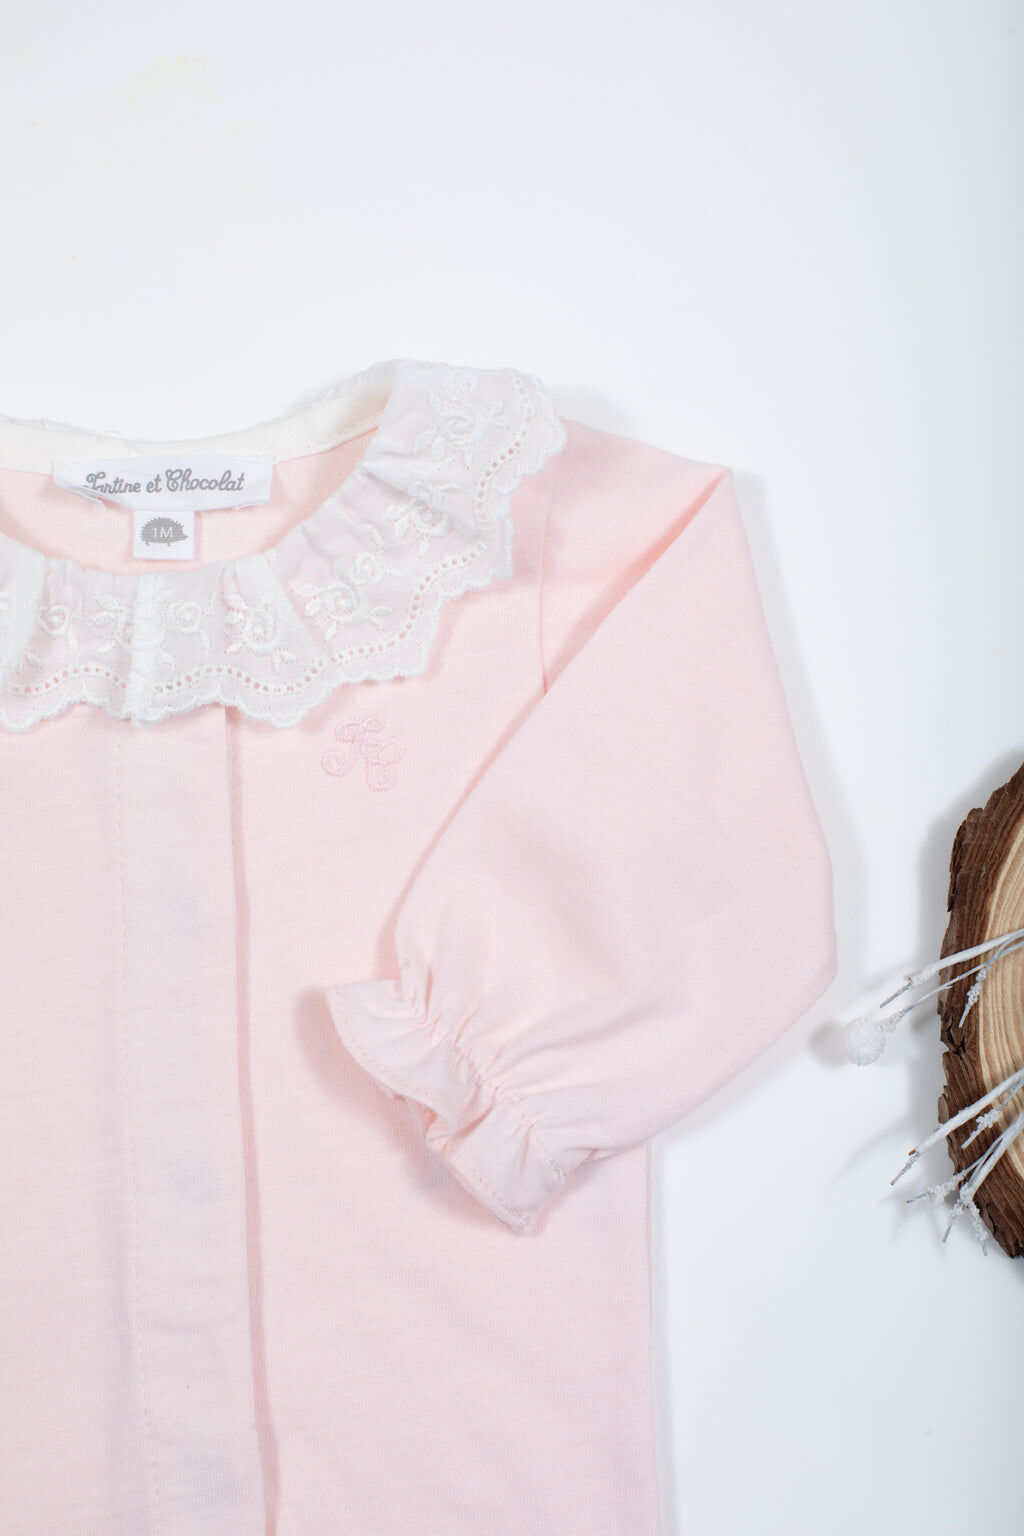 Body - Pale pink Peter pan collar Embroidered